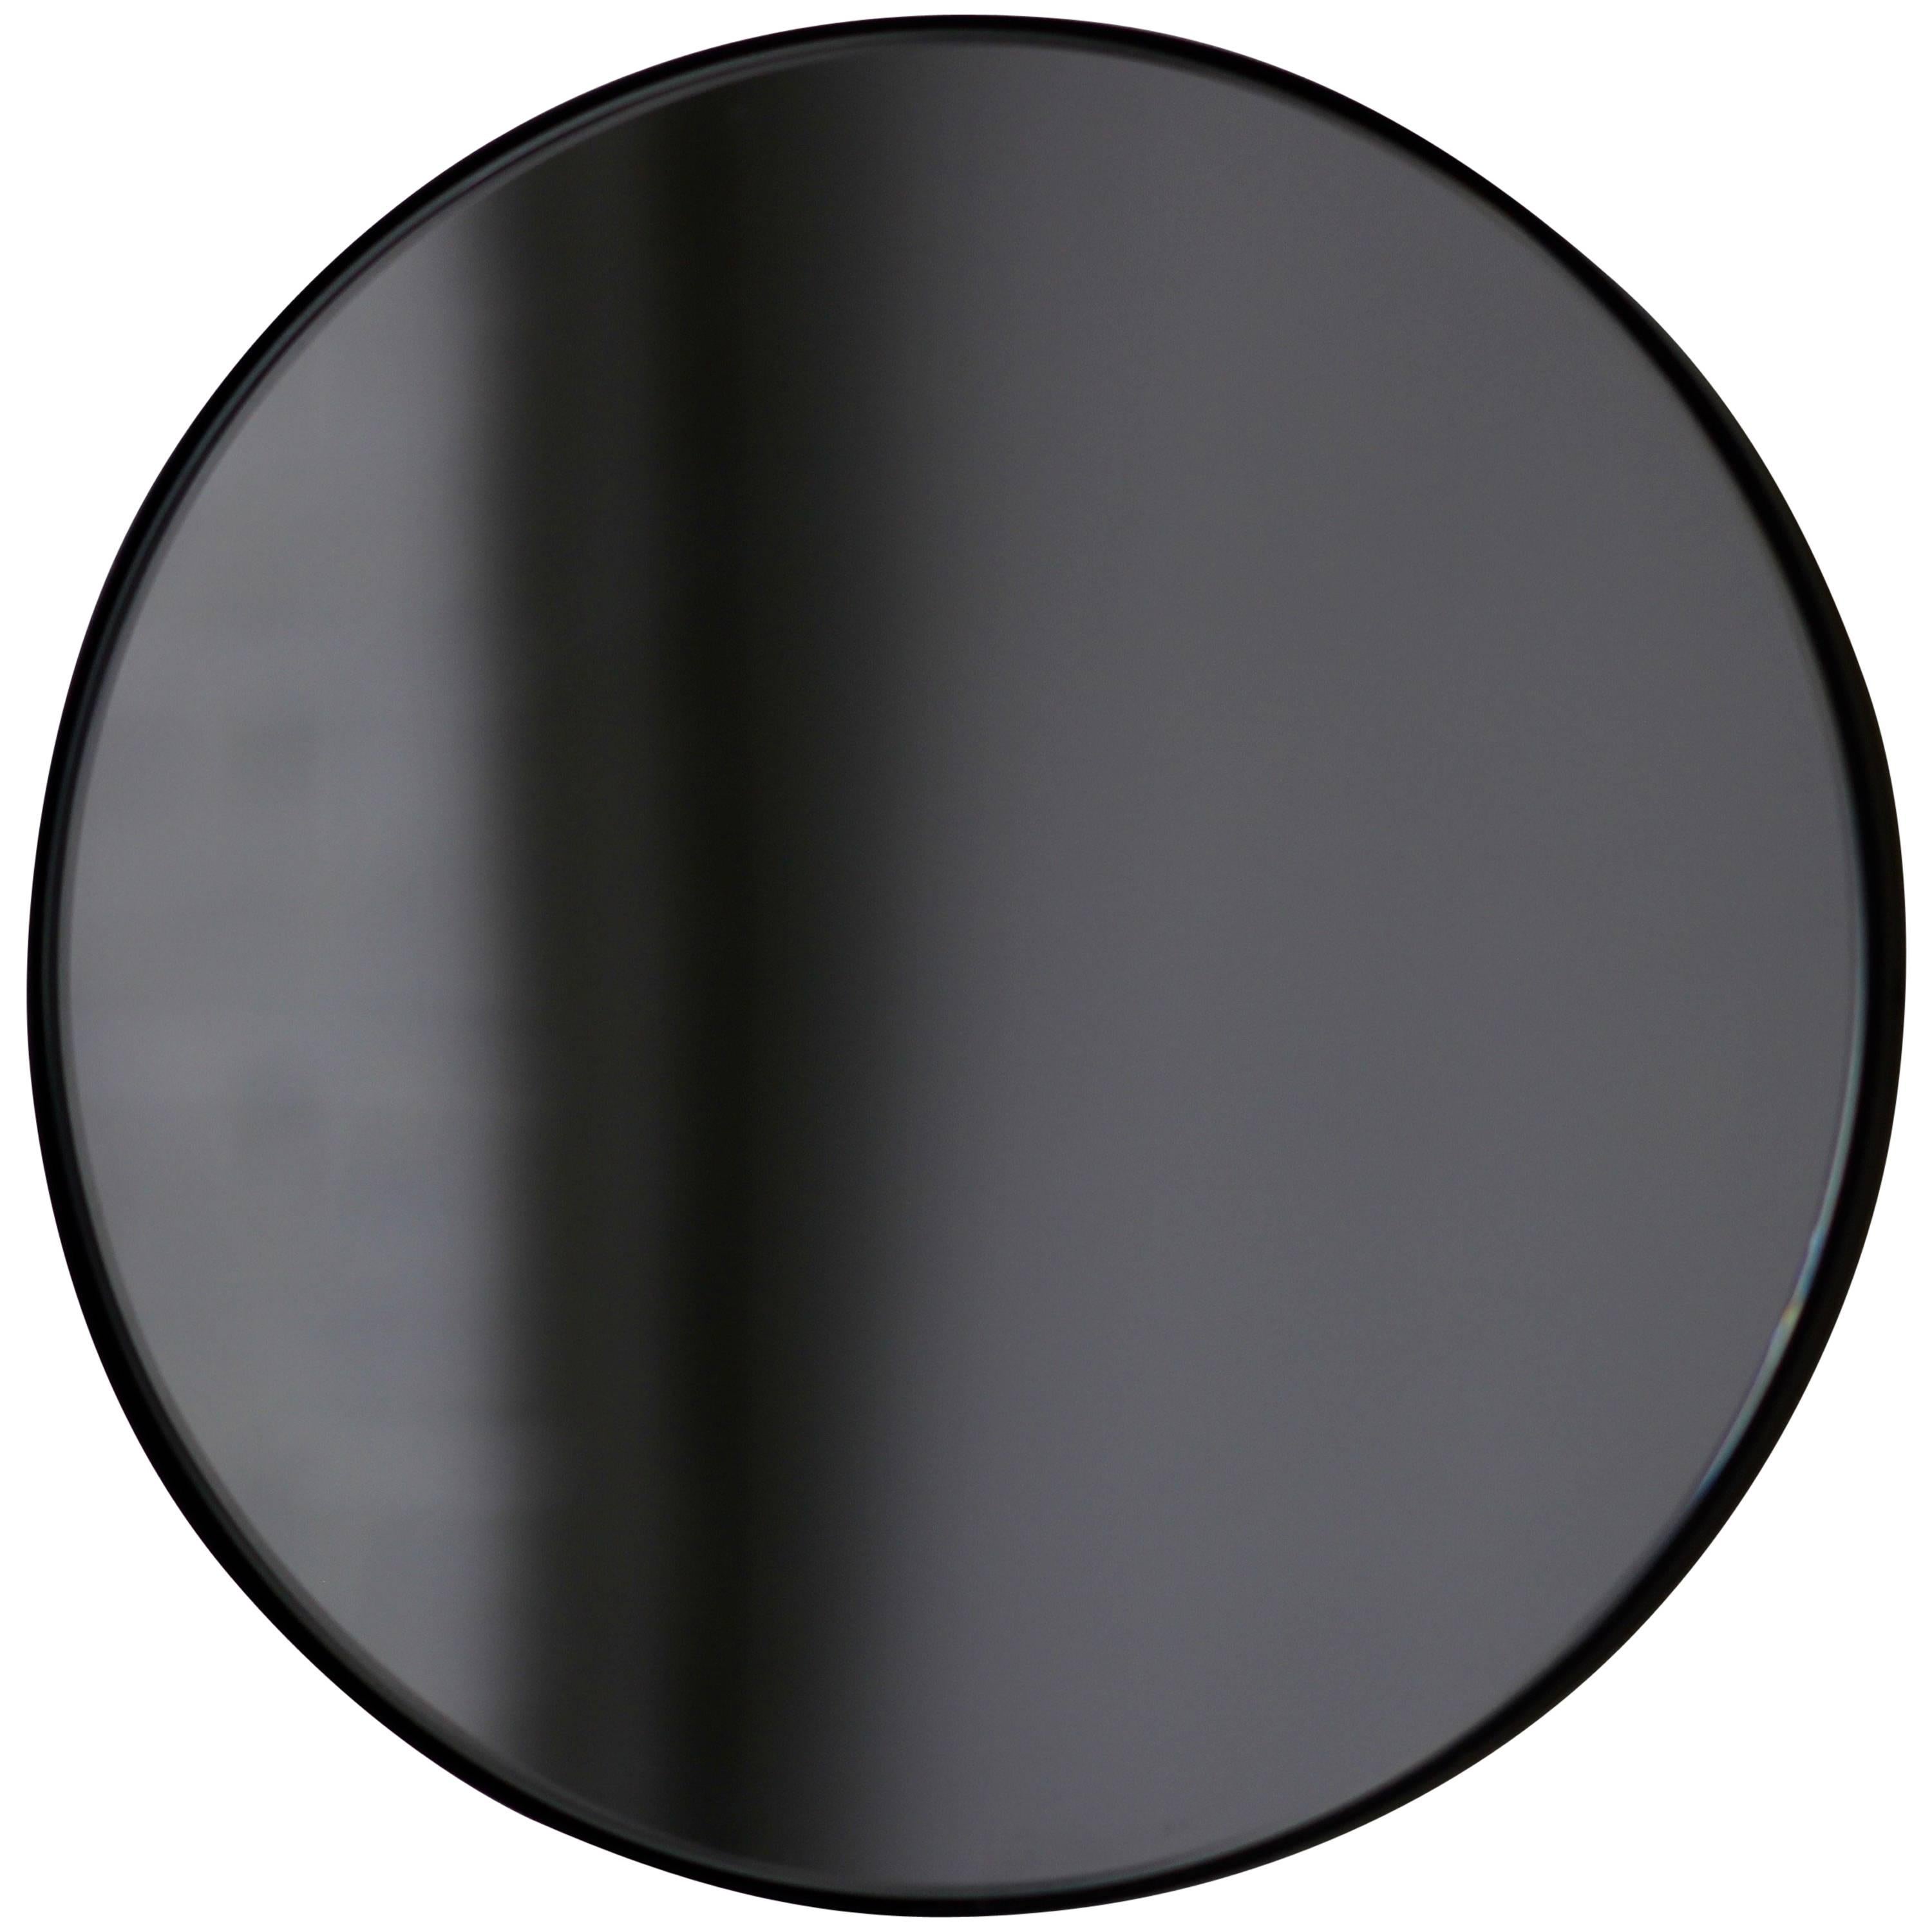 Orbis Black Tinted Round Minimalist Mirror with Black Frame, Customisable, Small For Sale